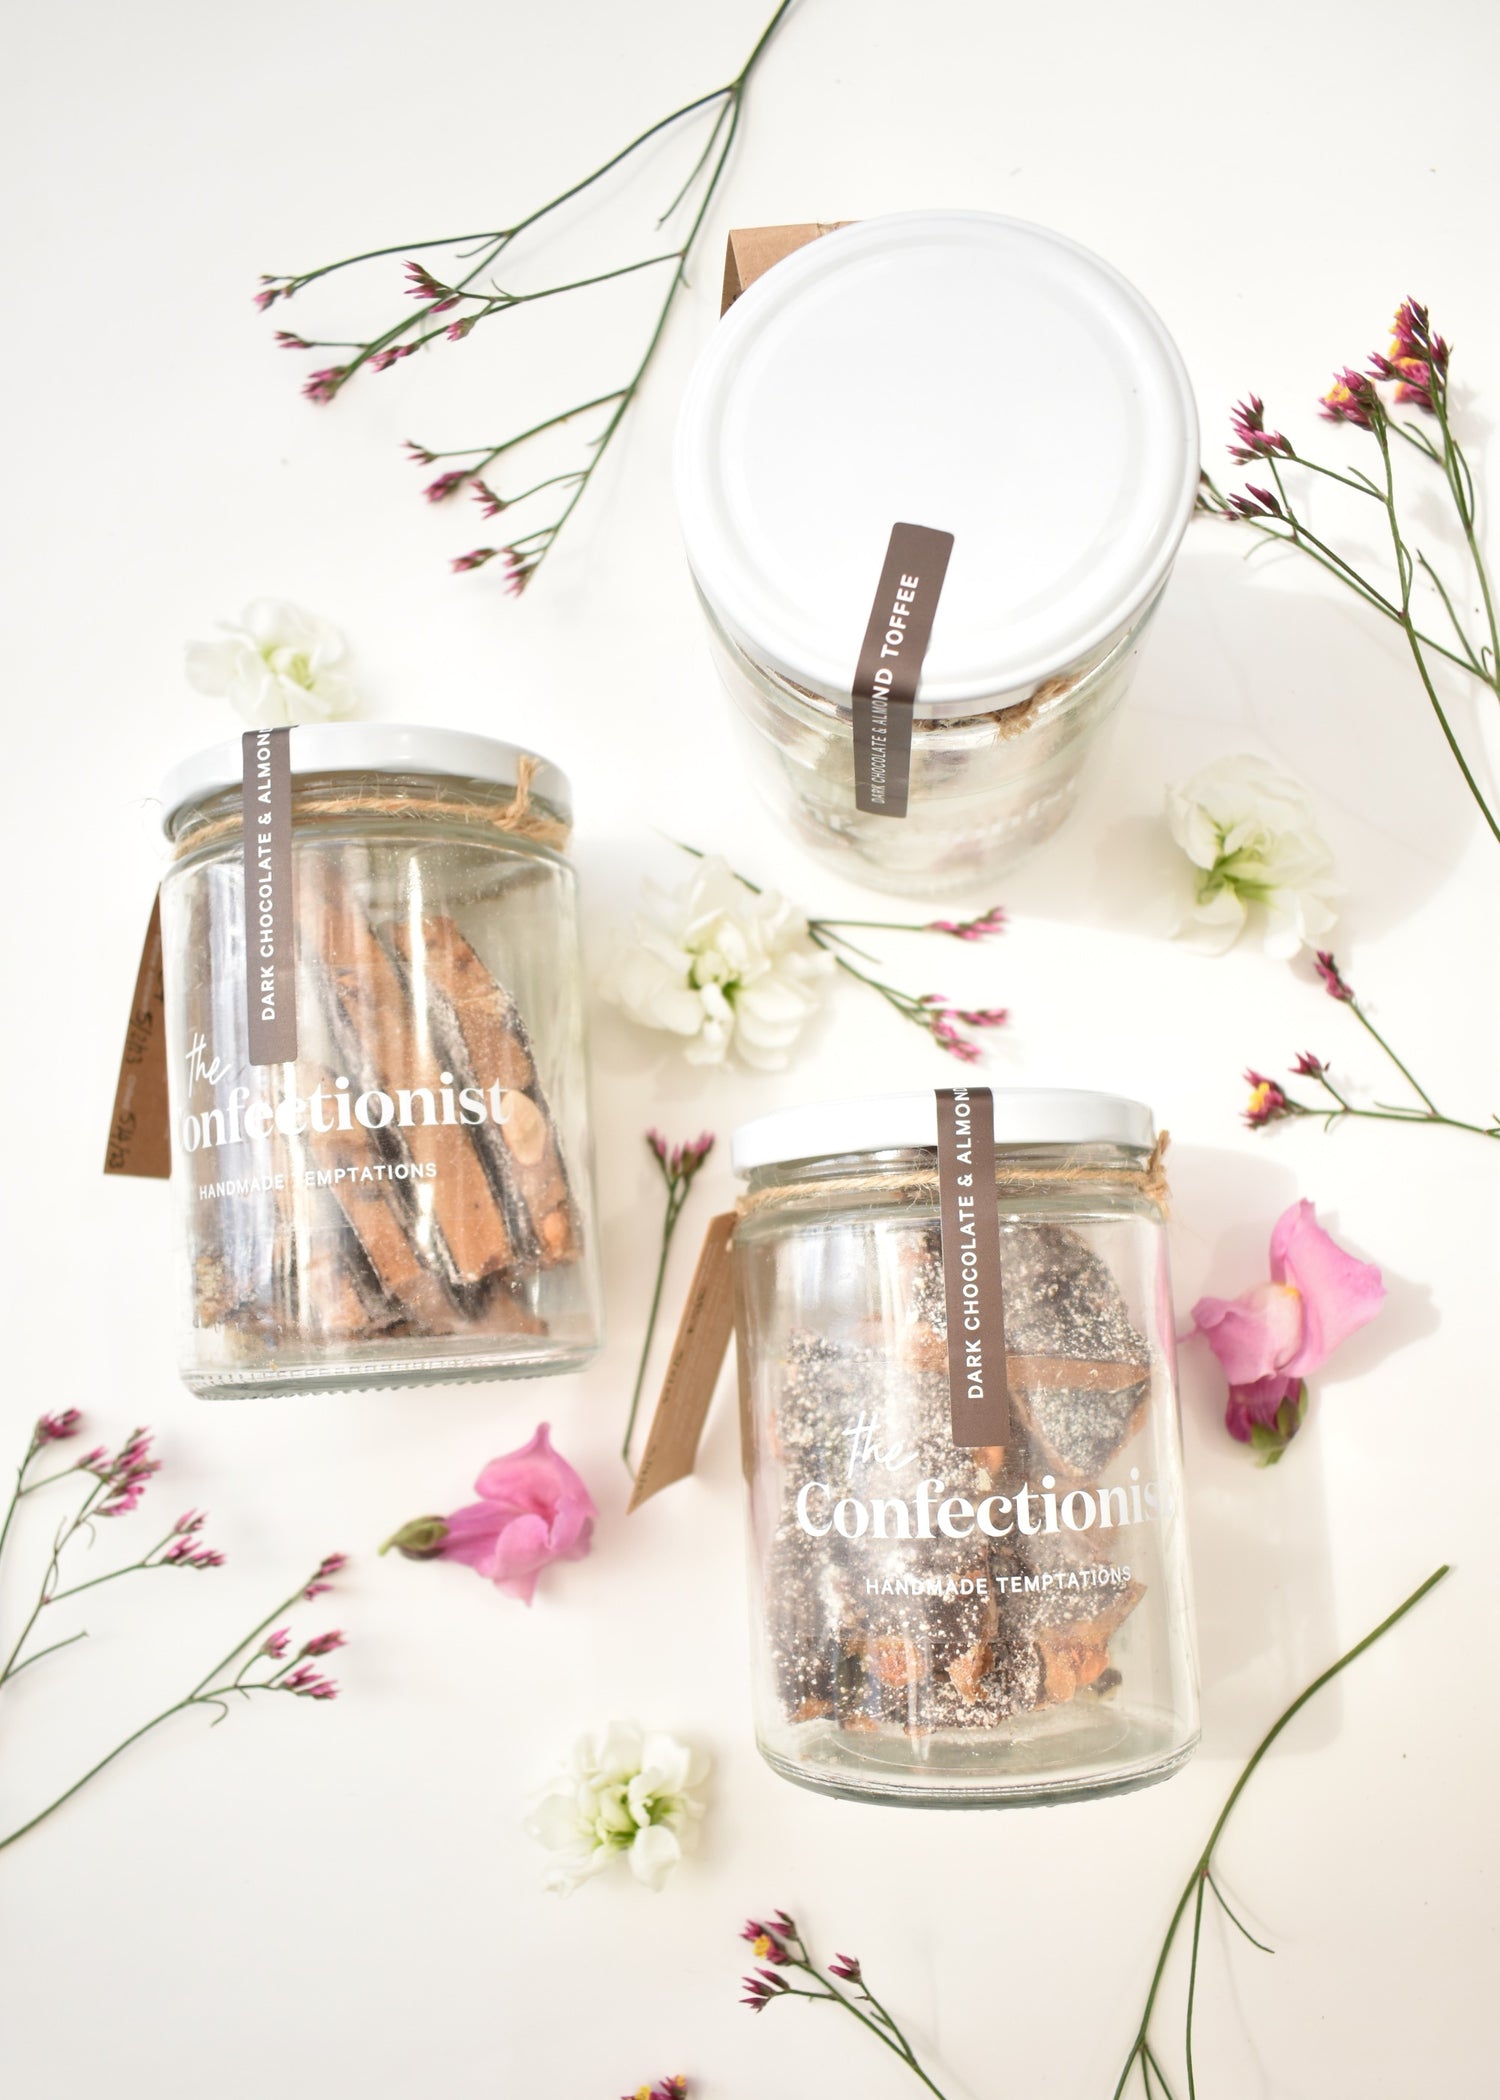 Flat lay image of jars of dark chocolate and almond toffee. White background with pink and white flowers